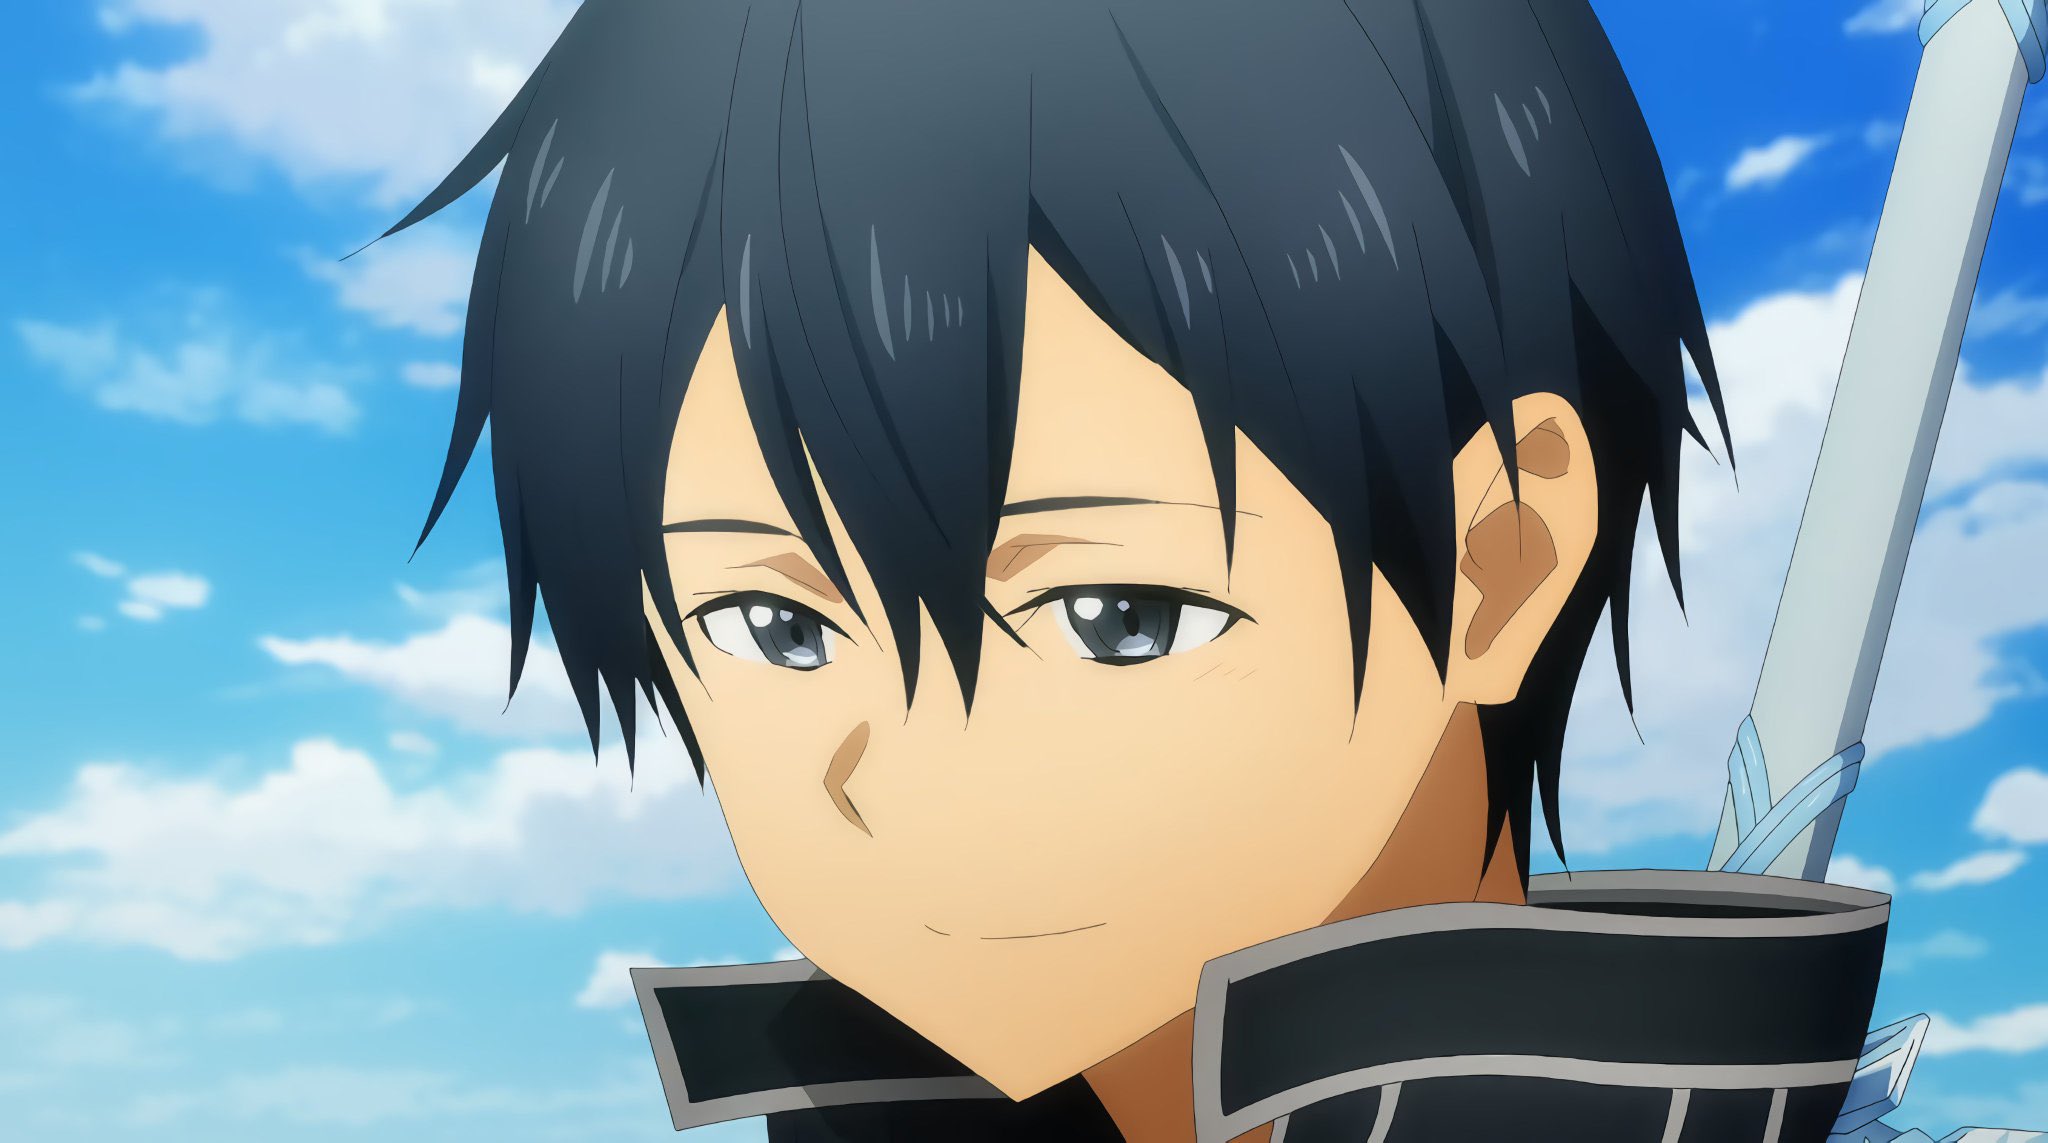 Who will Kirito End up with